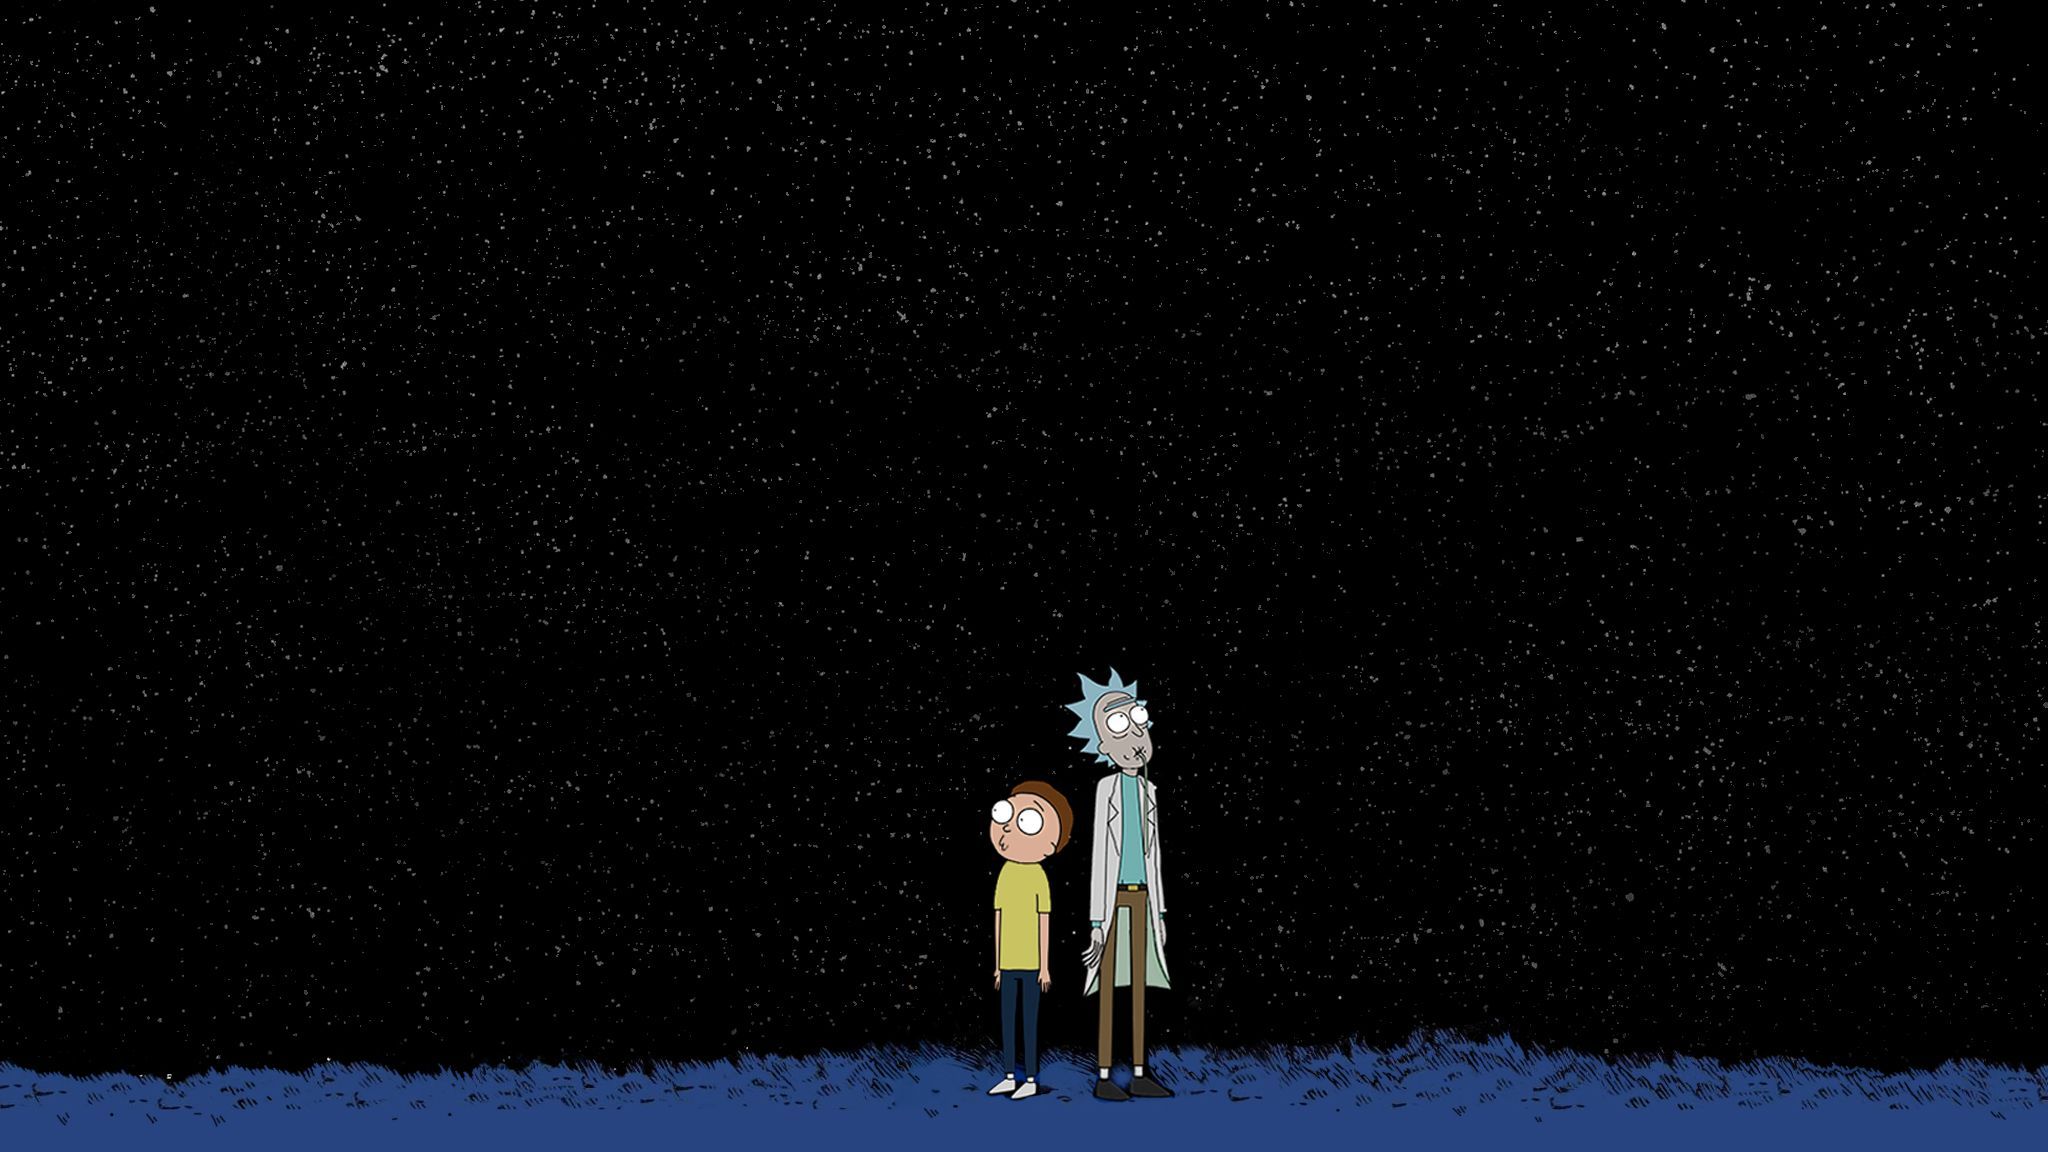 Love Calvin and Hobbes and just got hooked on Rick and Morty. Made